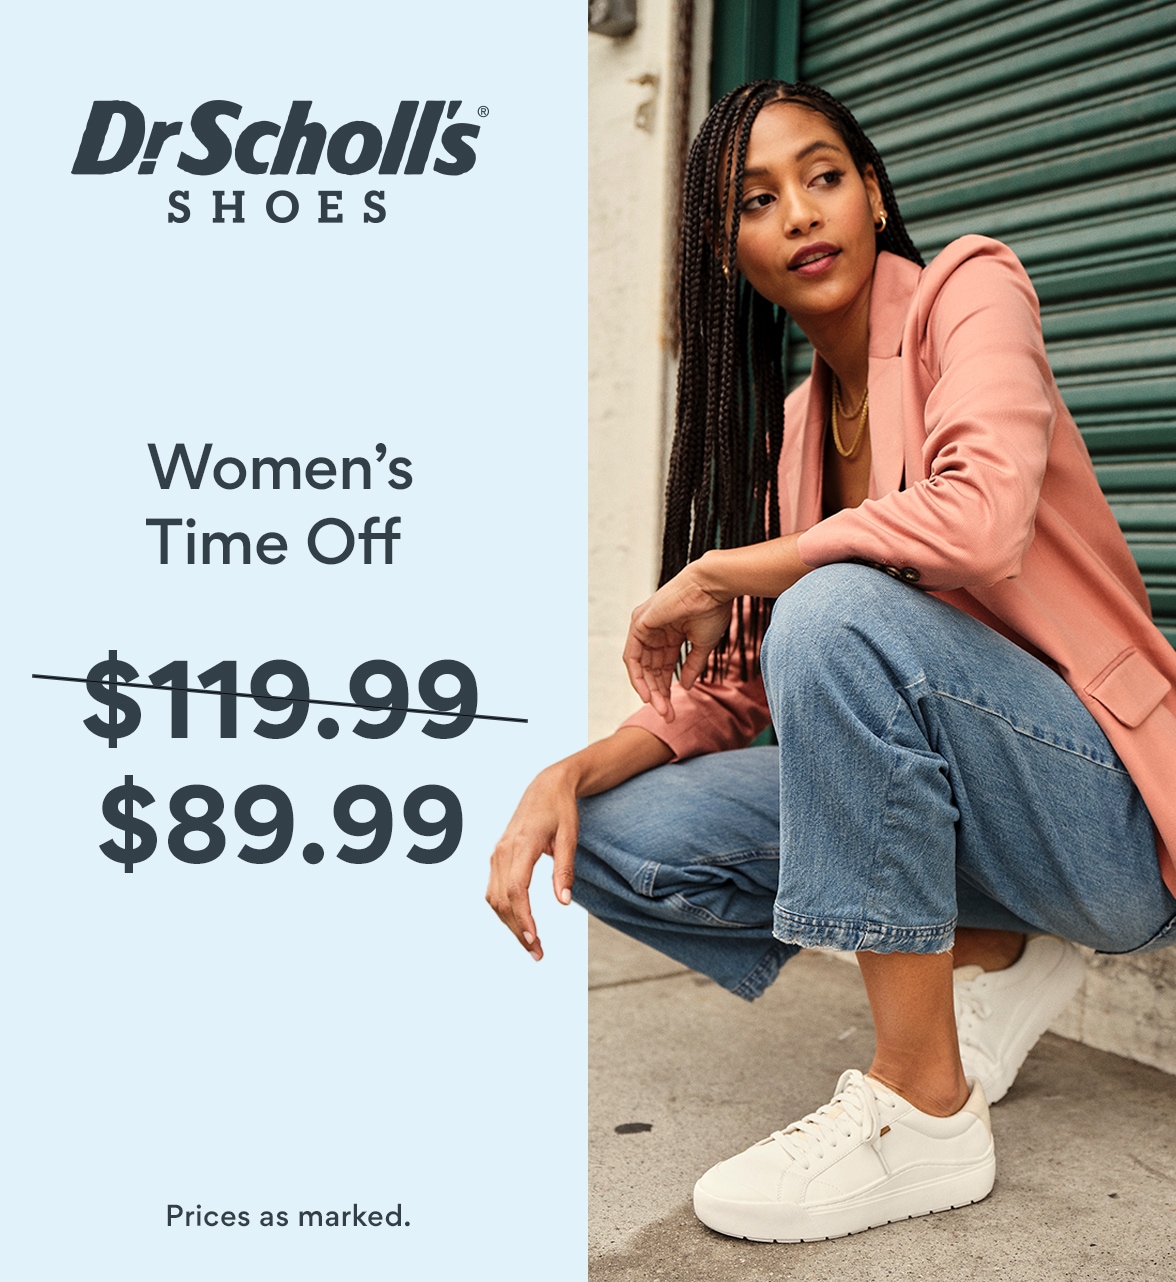 dr. scholl's shoes women's time off marked down to $89.99 from $119.99